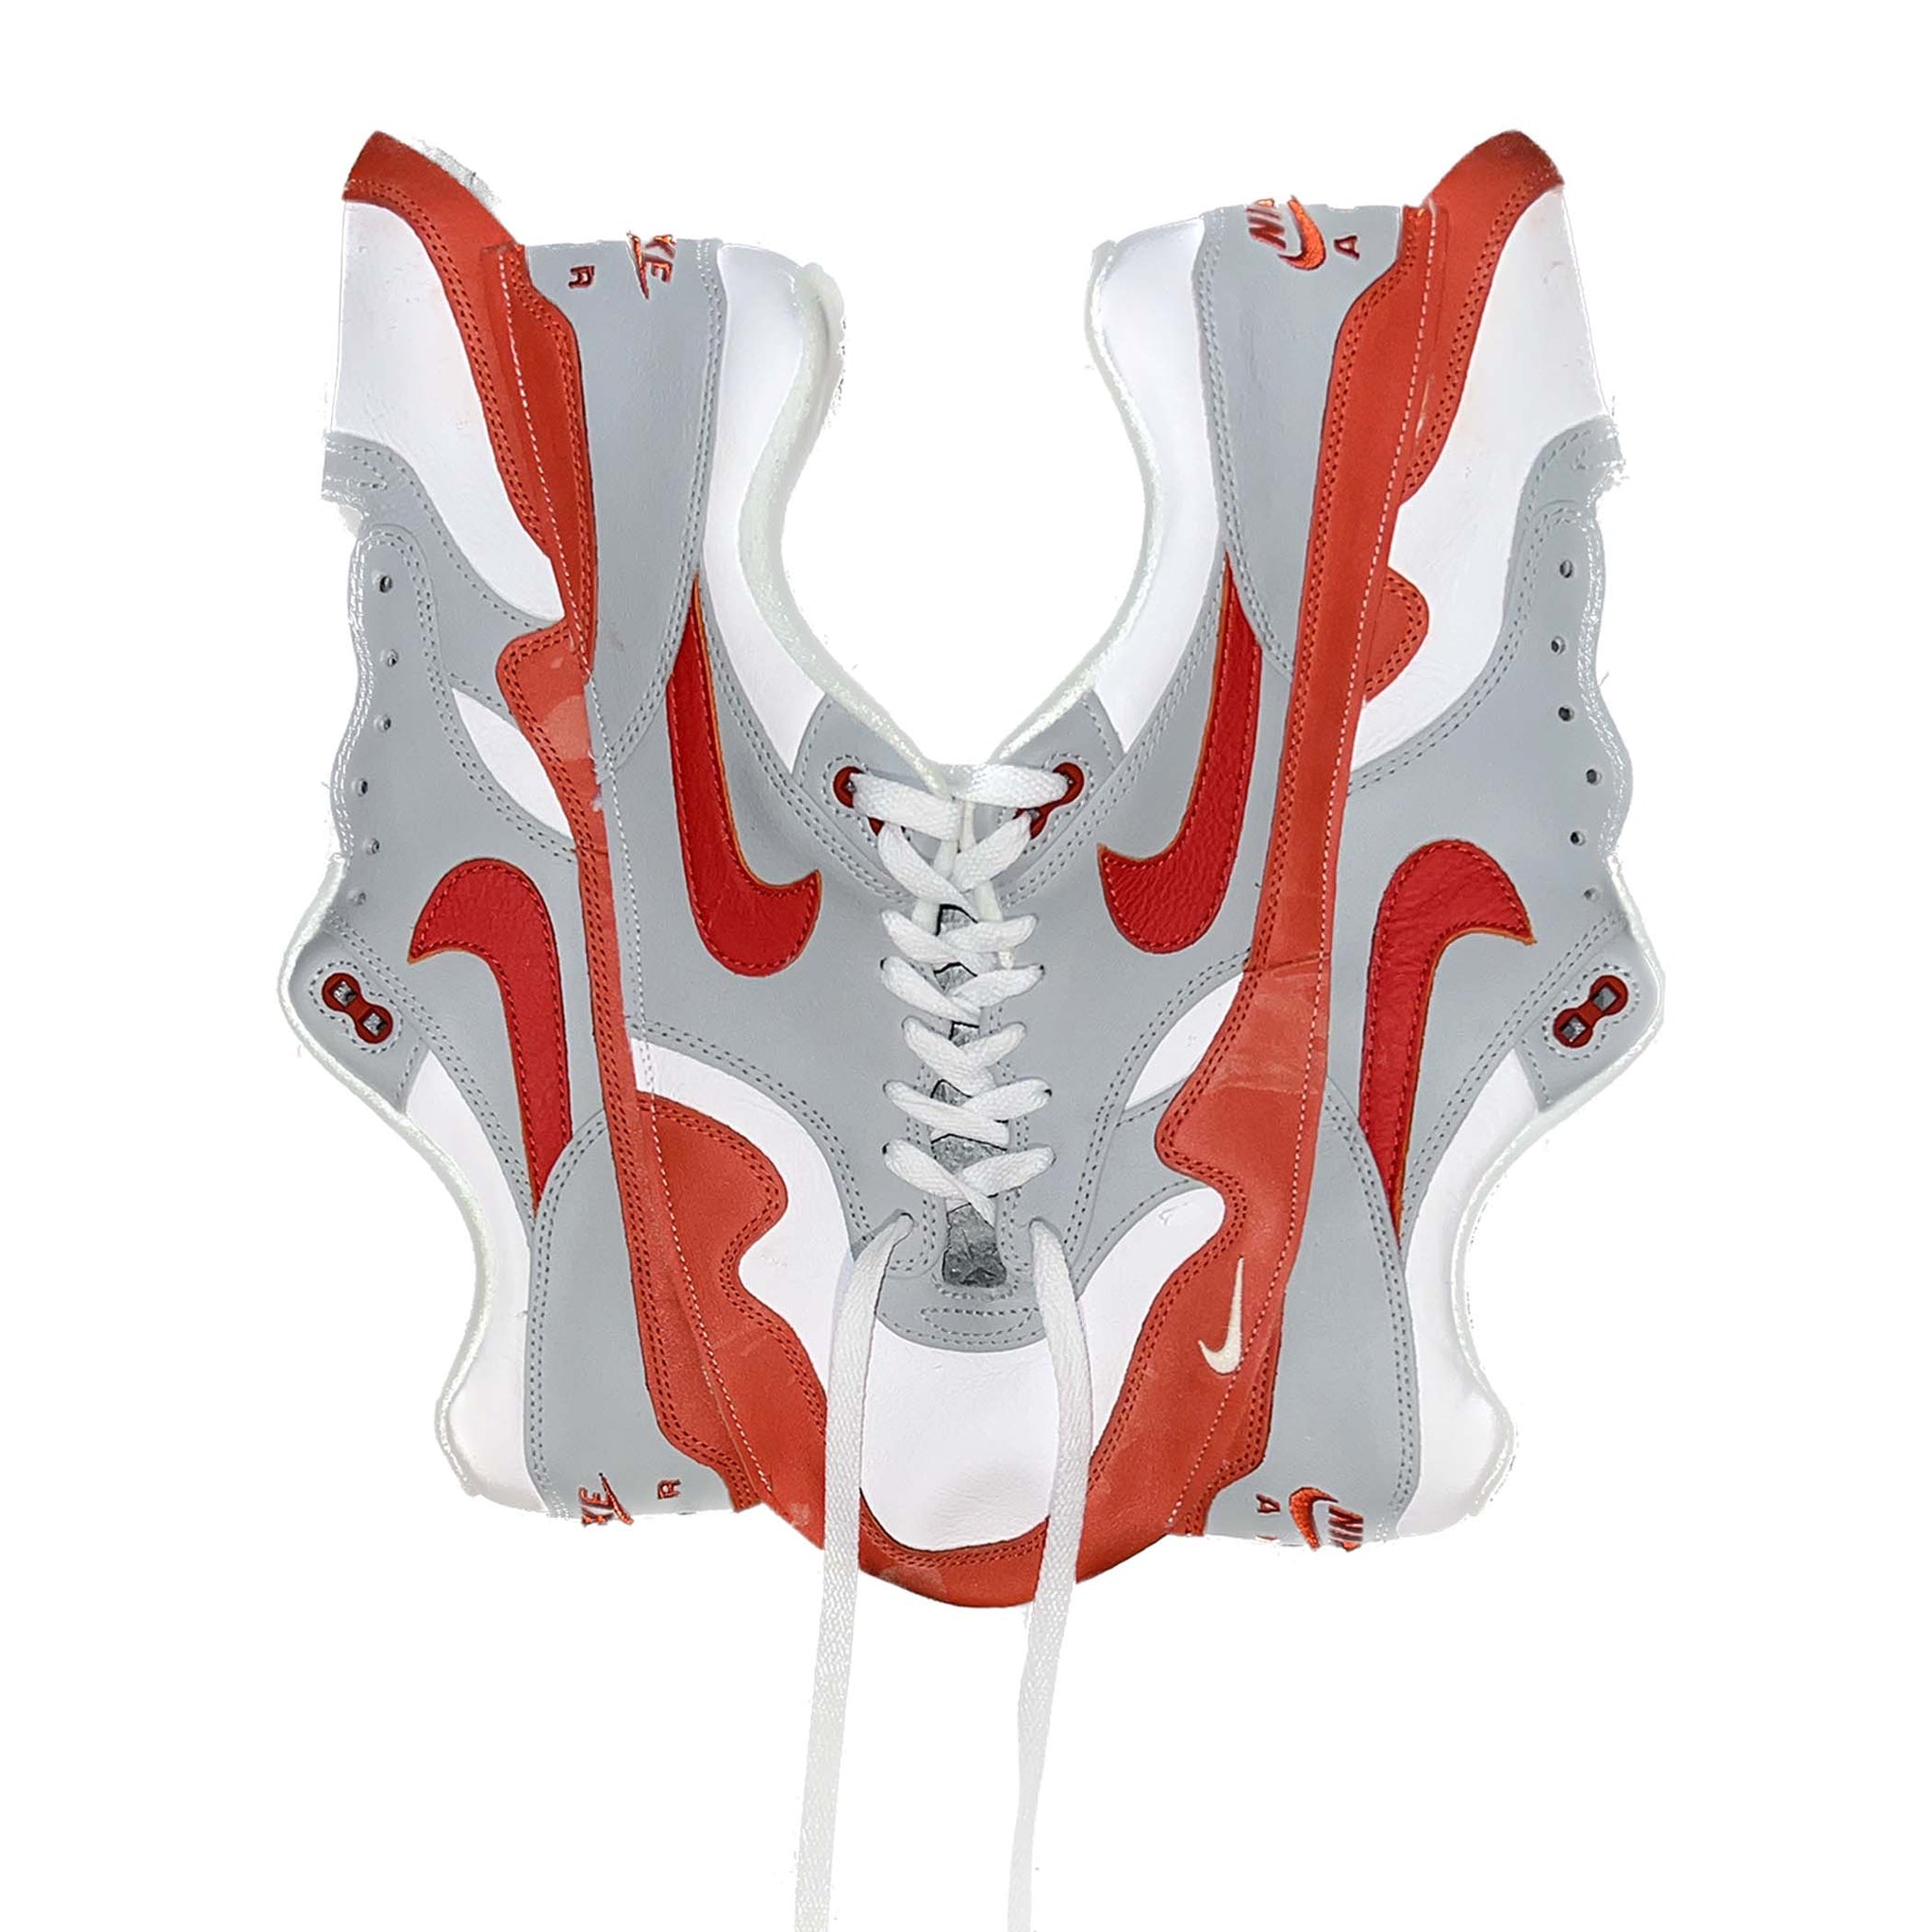 AM-90 1 x FMG RED WAVE SNEAKER CORSET